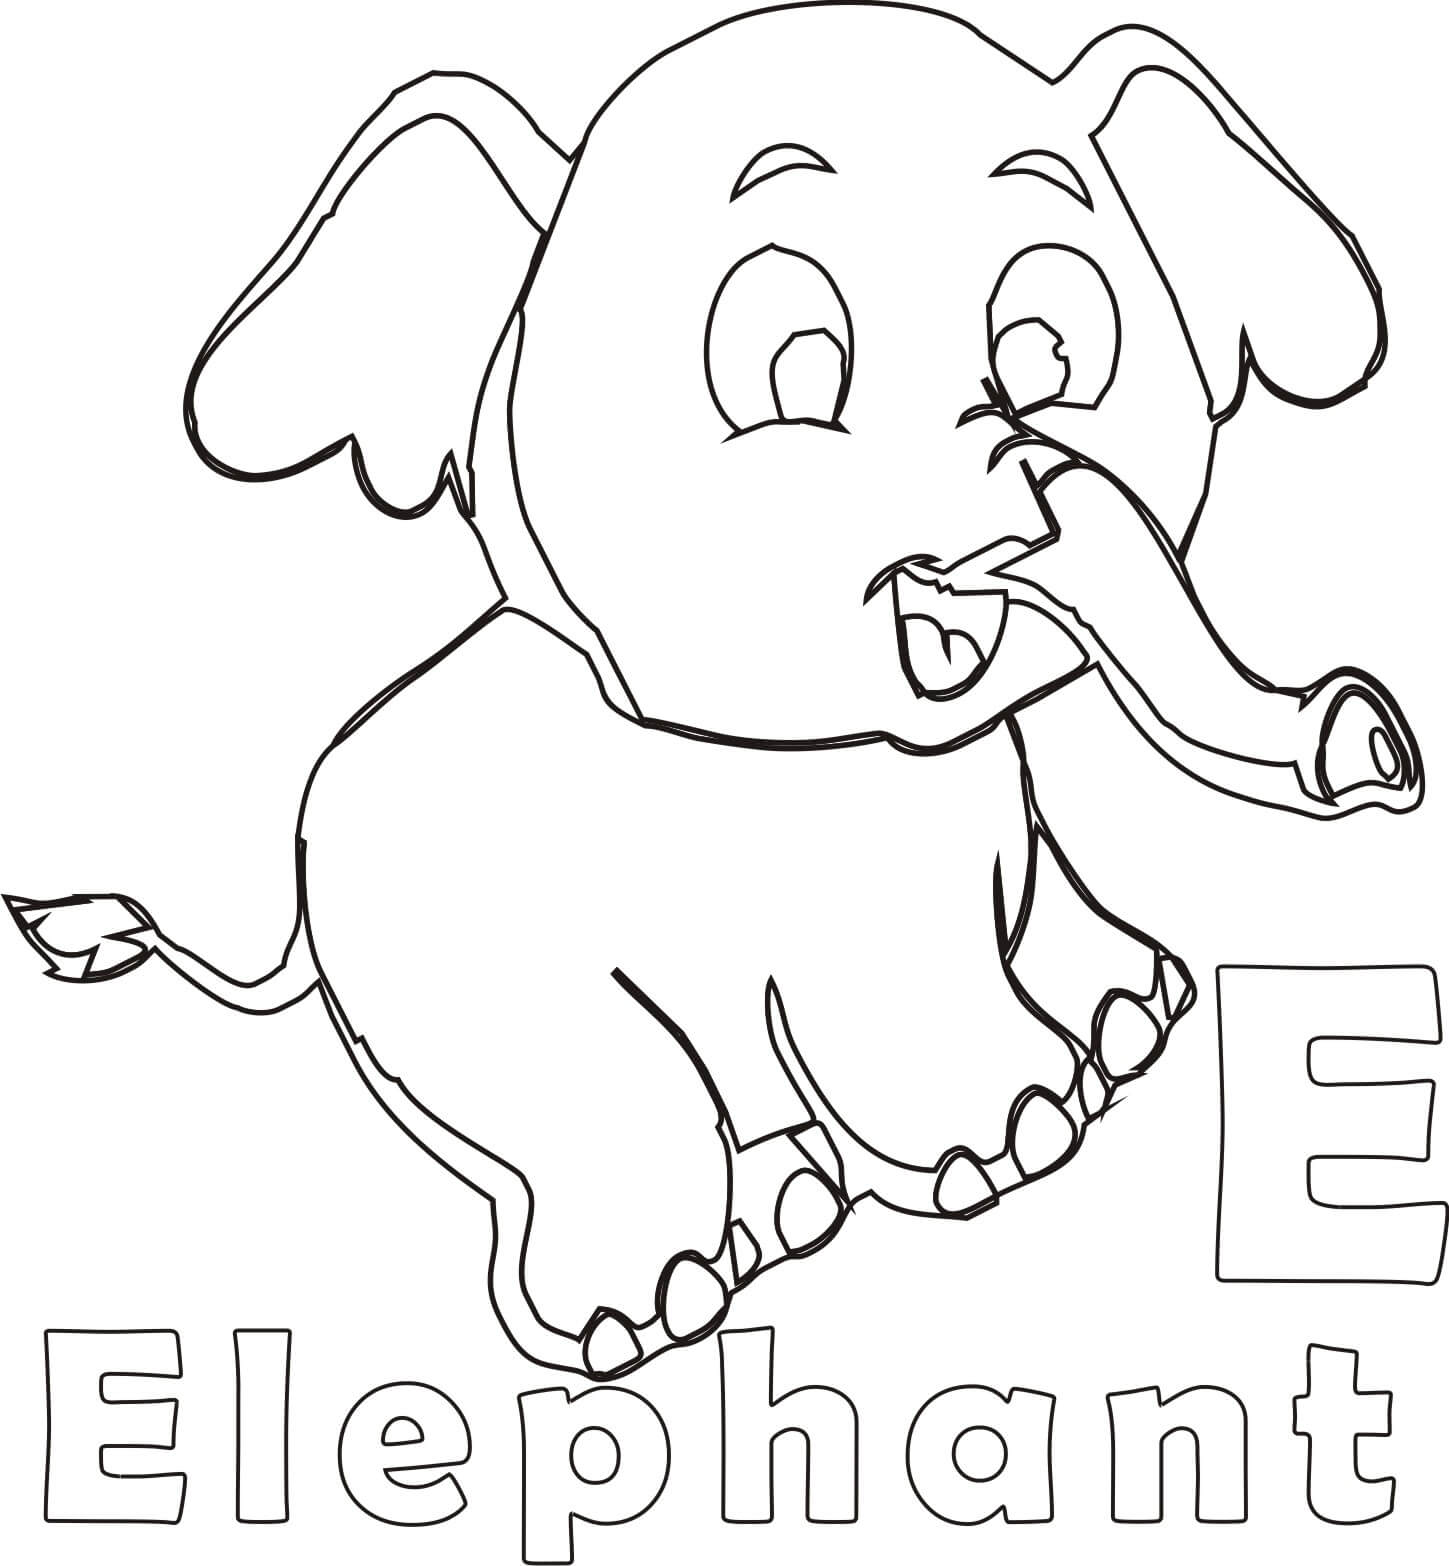 cute elephant coloring page